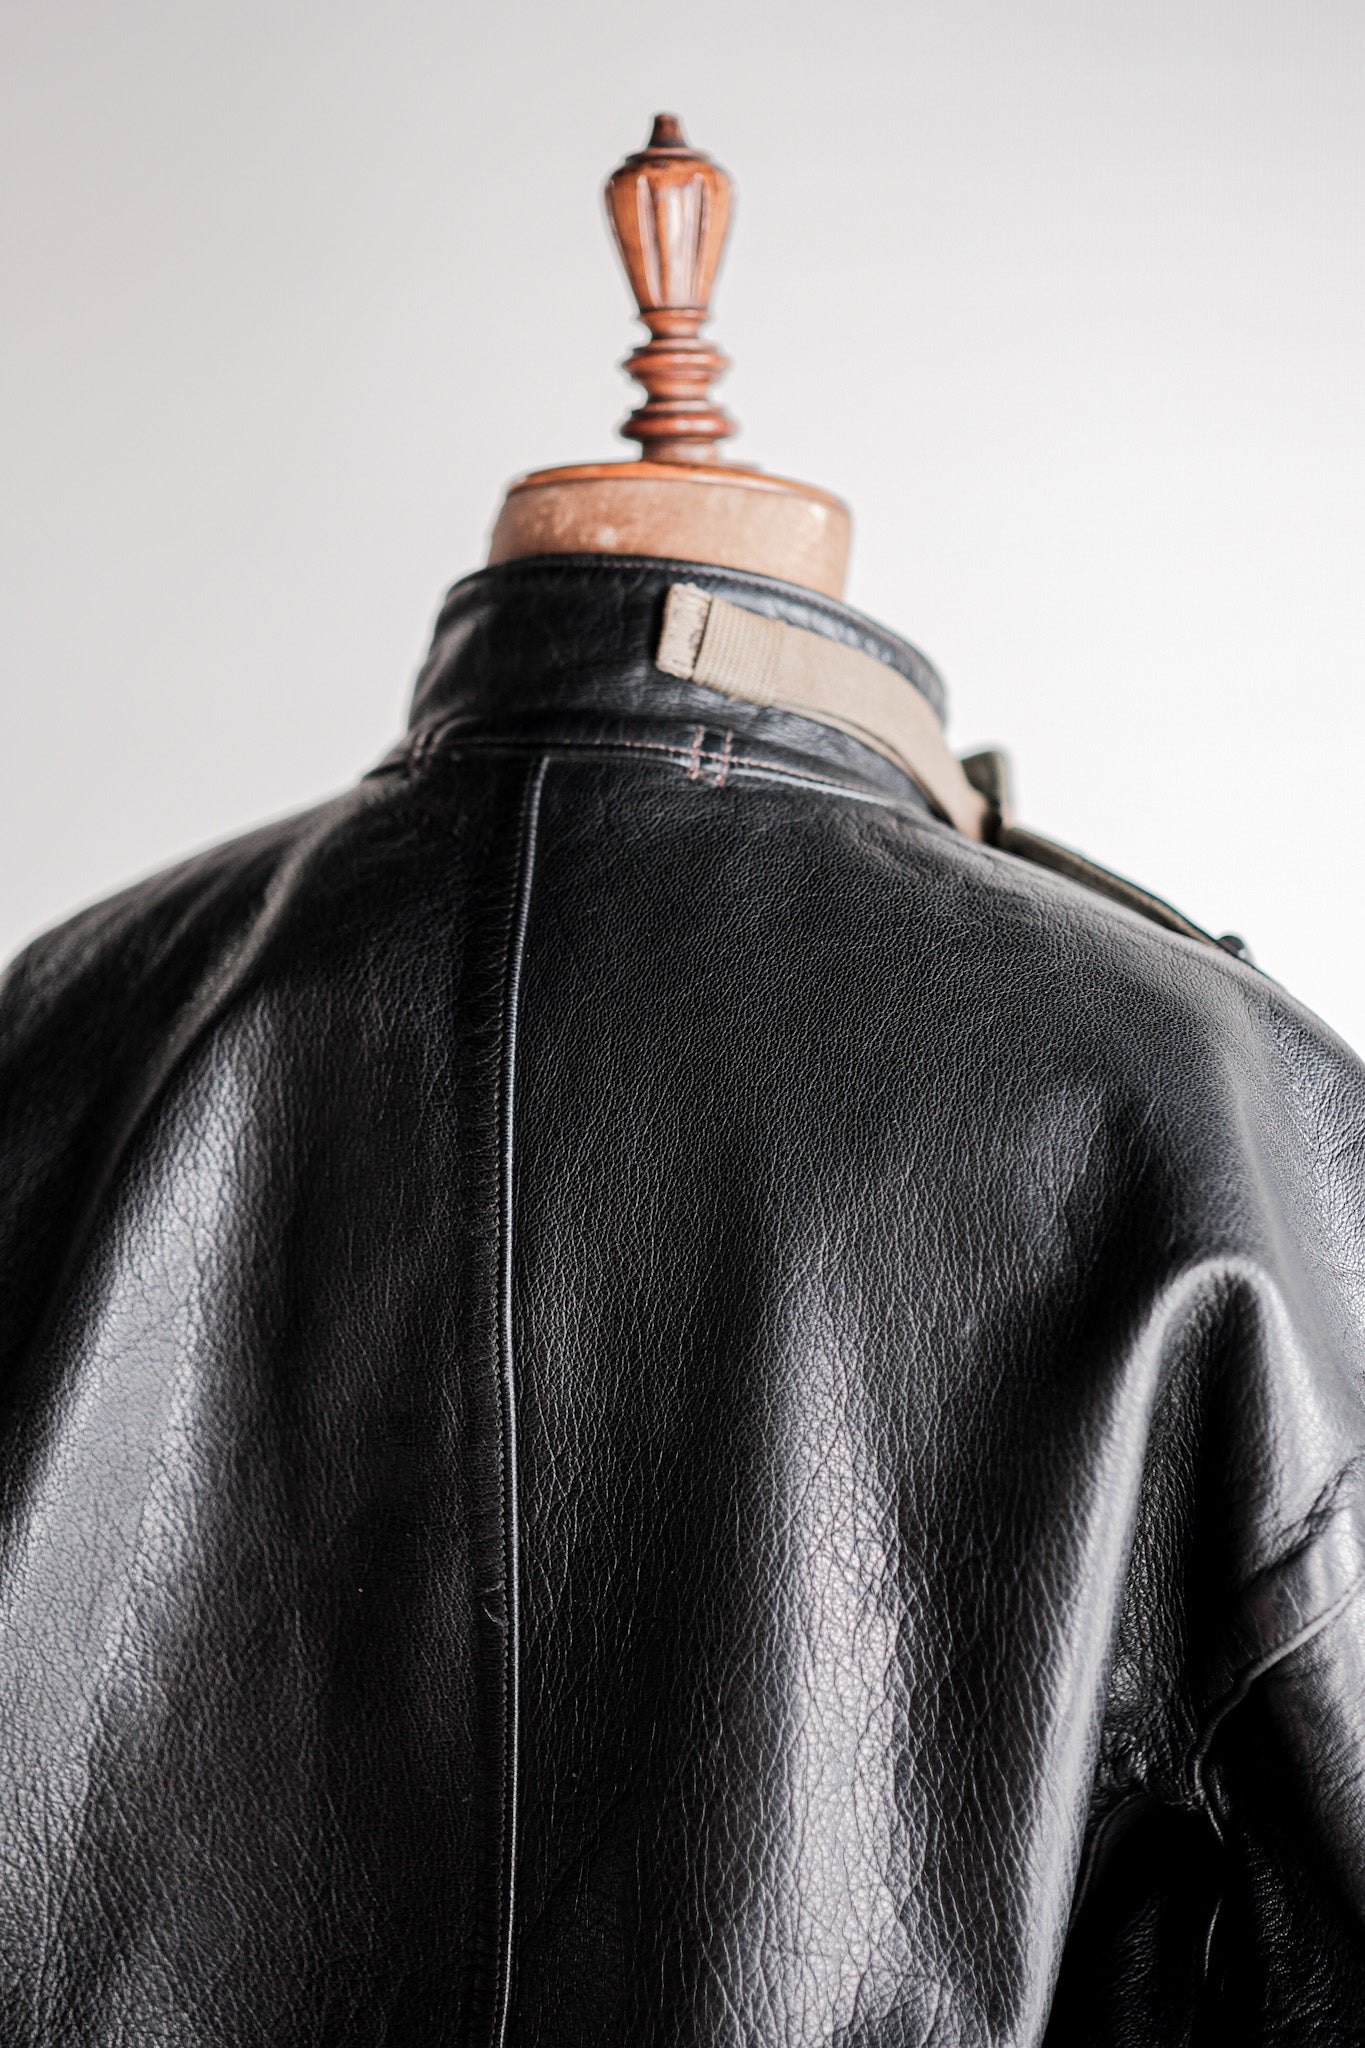 【~50's】Swedish Army Dispatch Rider Leather Motorcycle Jacket